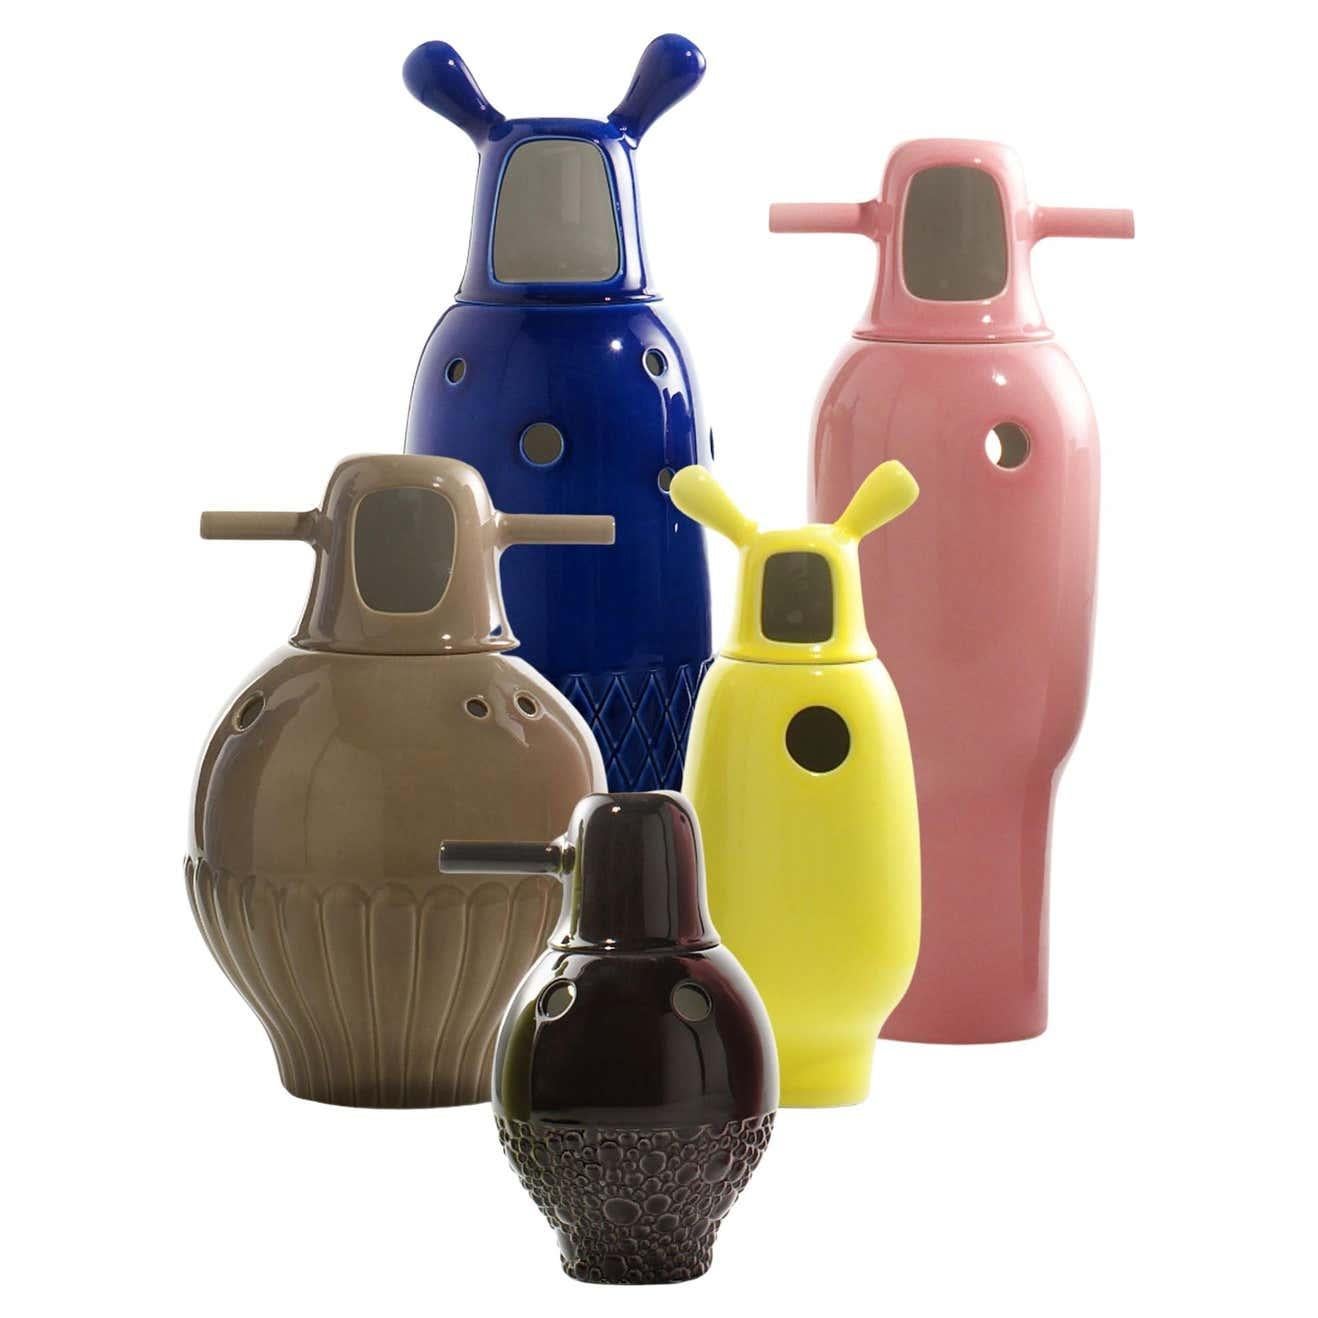 https://a.1stdibscdn.com/set-of-5-contemporary-glazed-ceramic-showtime-vase-collection-by-jaime-hayon-for-sale/f_14272/f_336562621680696823935/f_30241612_1662108168272_bg_processed_master.jpg